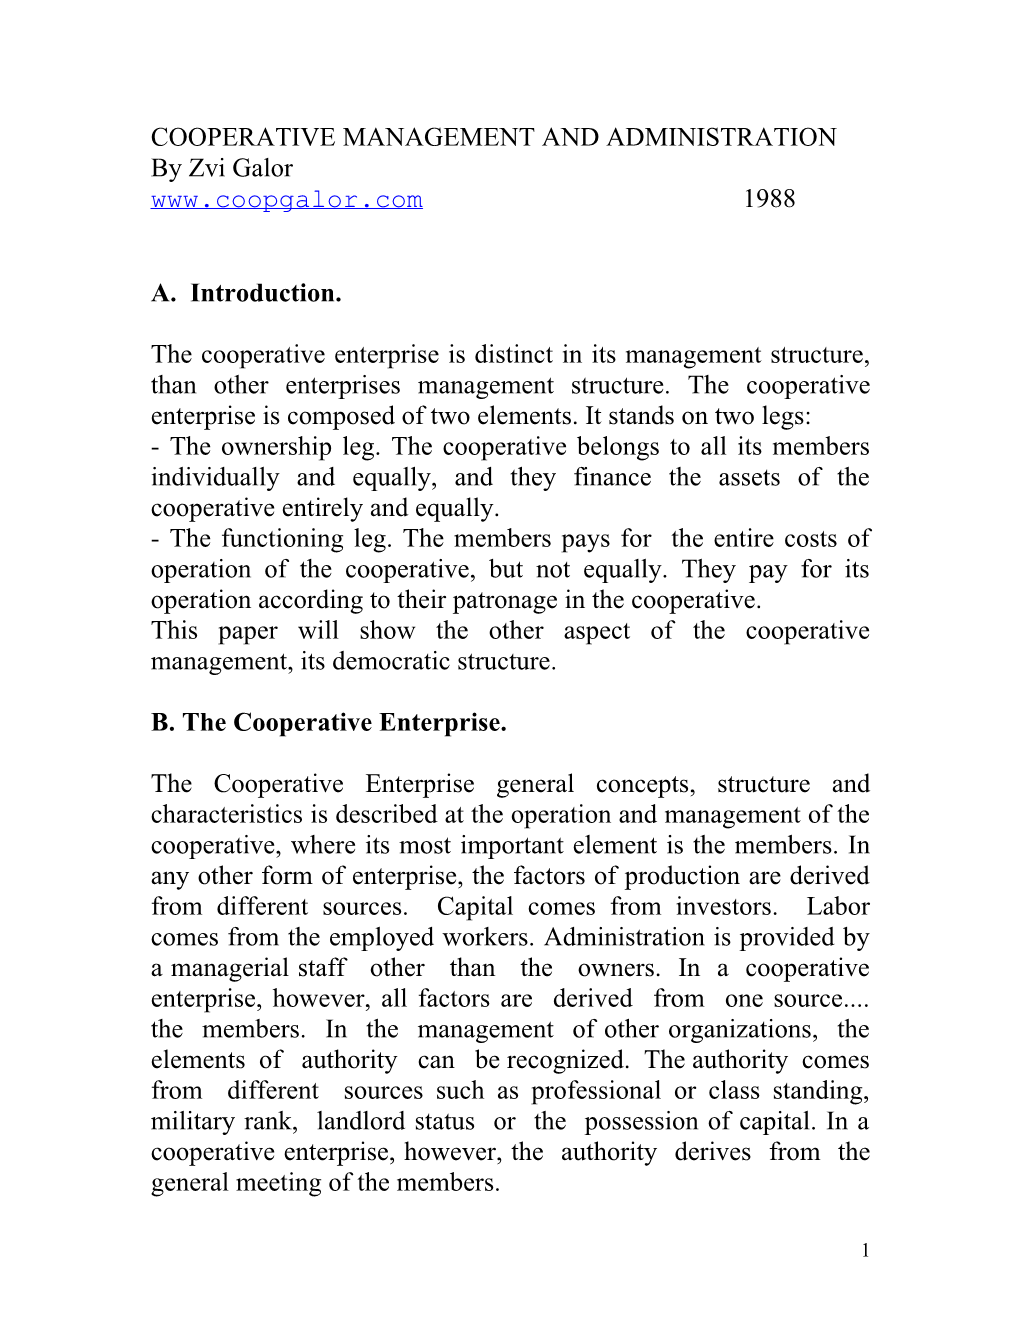 Cooperative Management and Administration